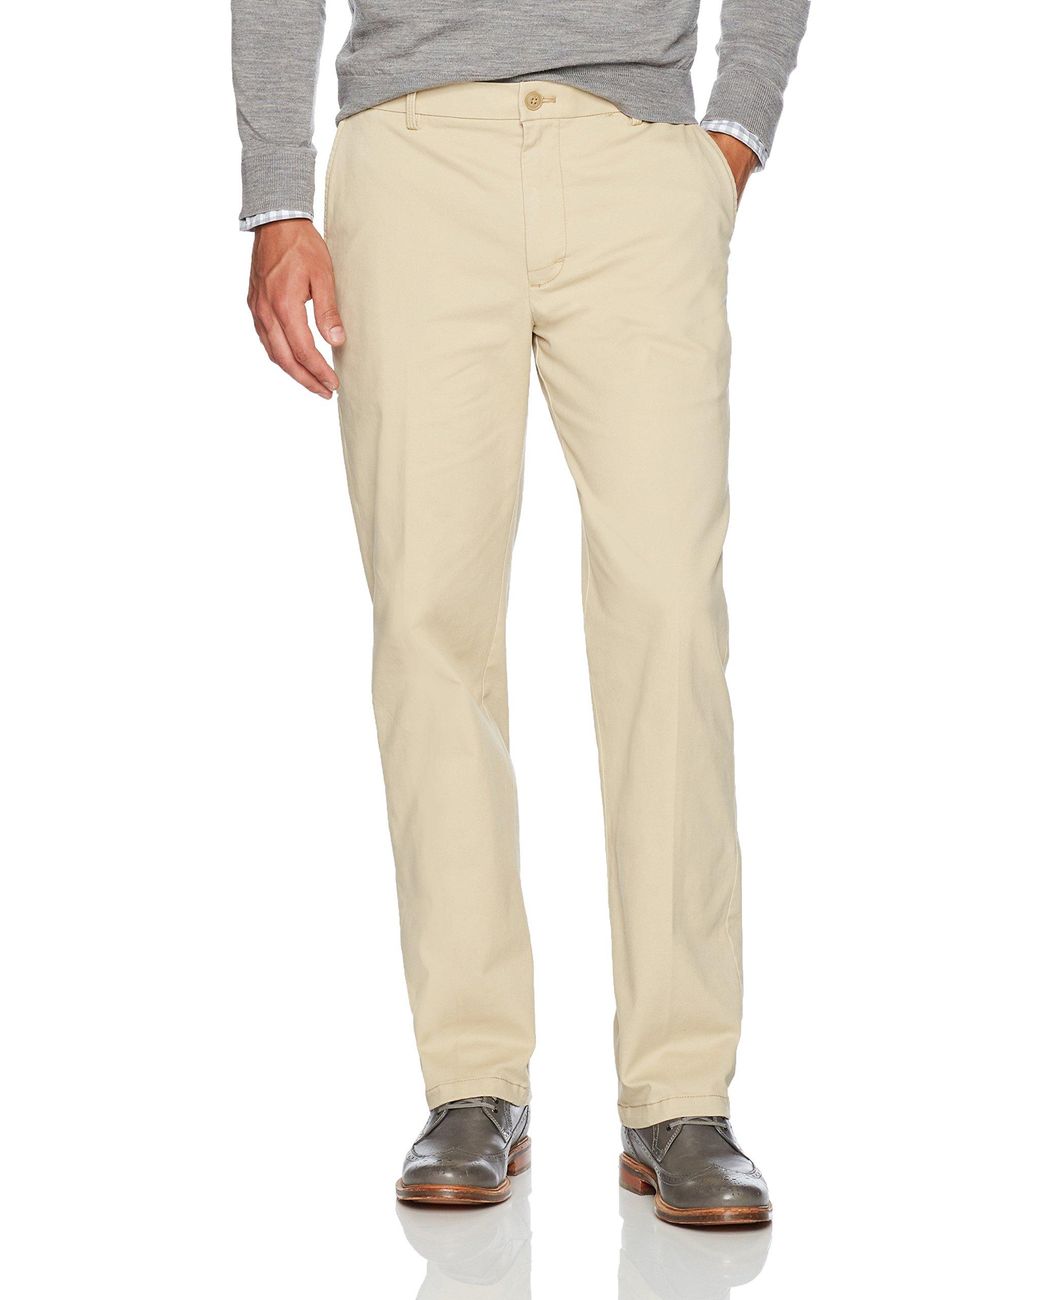 Izod Saltwater Stretch Flat Front Classic Fit Chino Pant in Pale Khaki ...